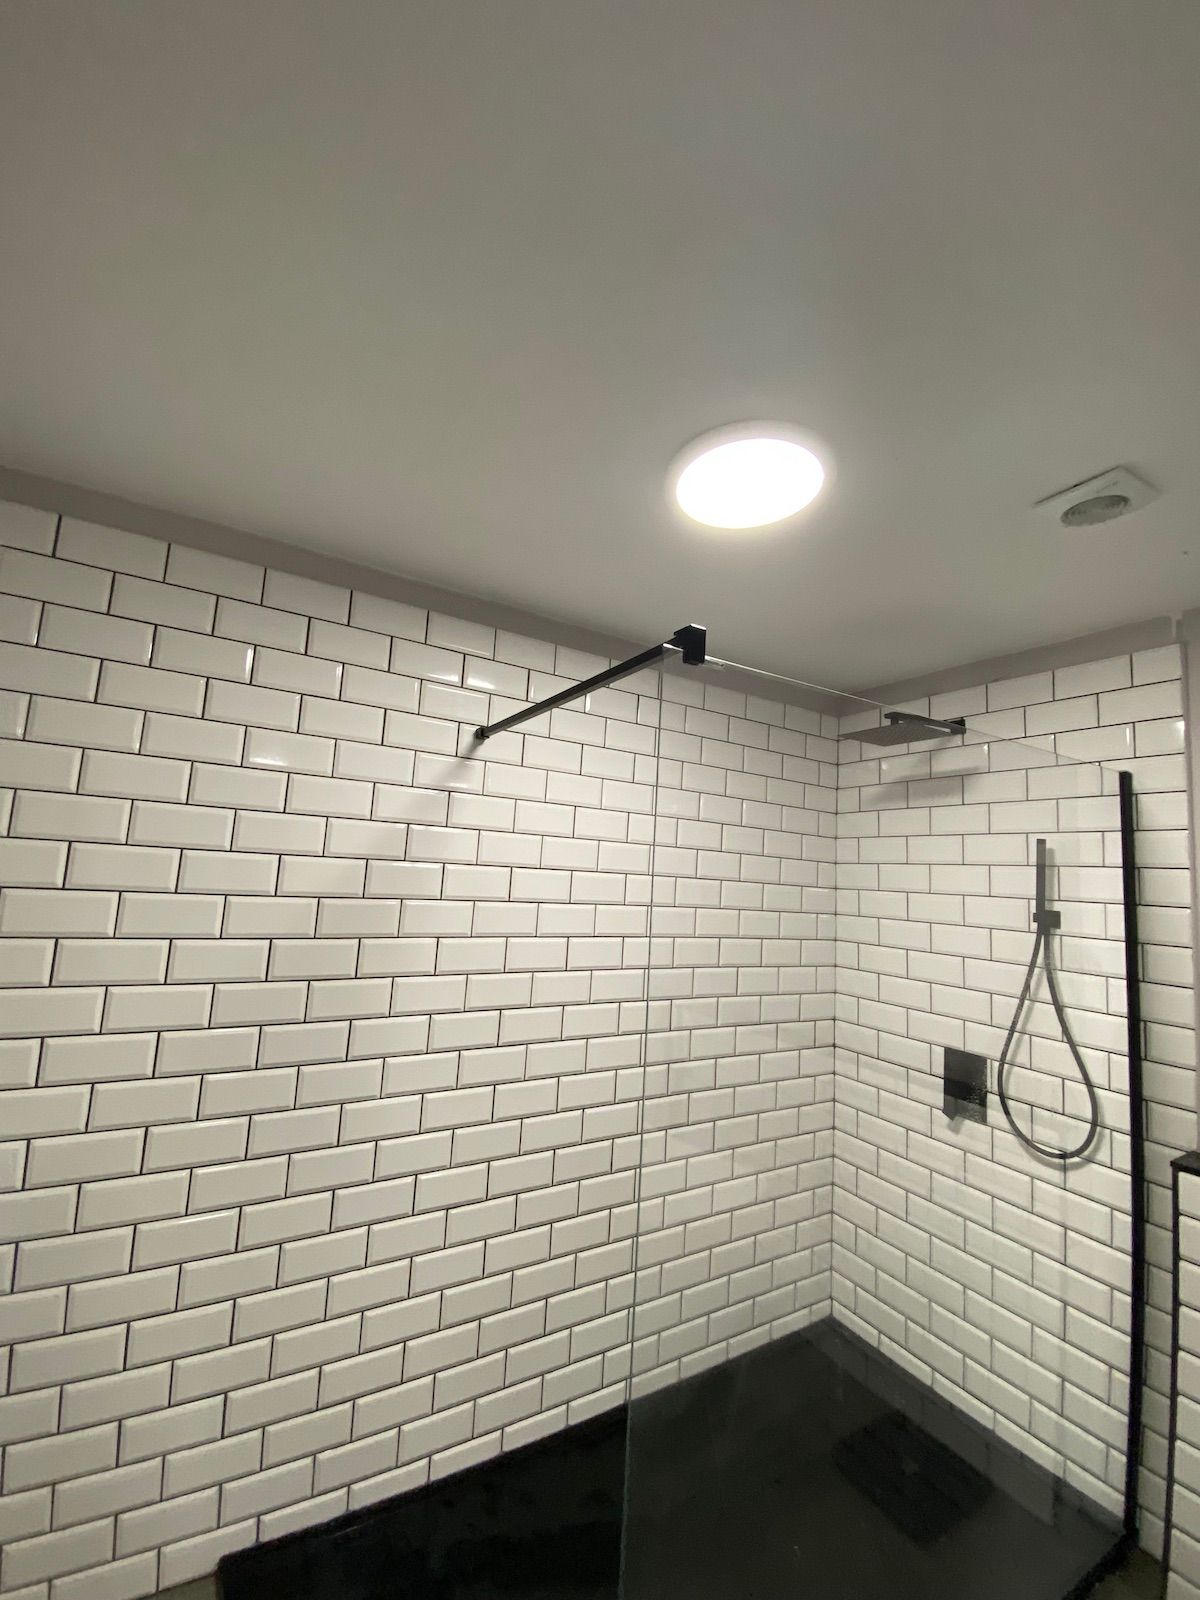 A shower with a glass divider and white subway tiles.